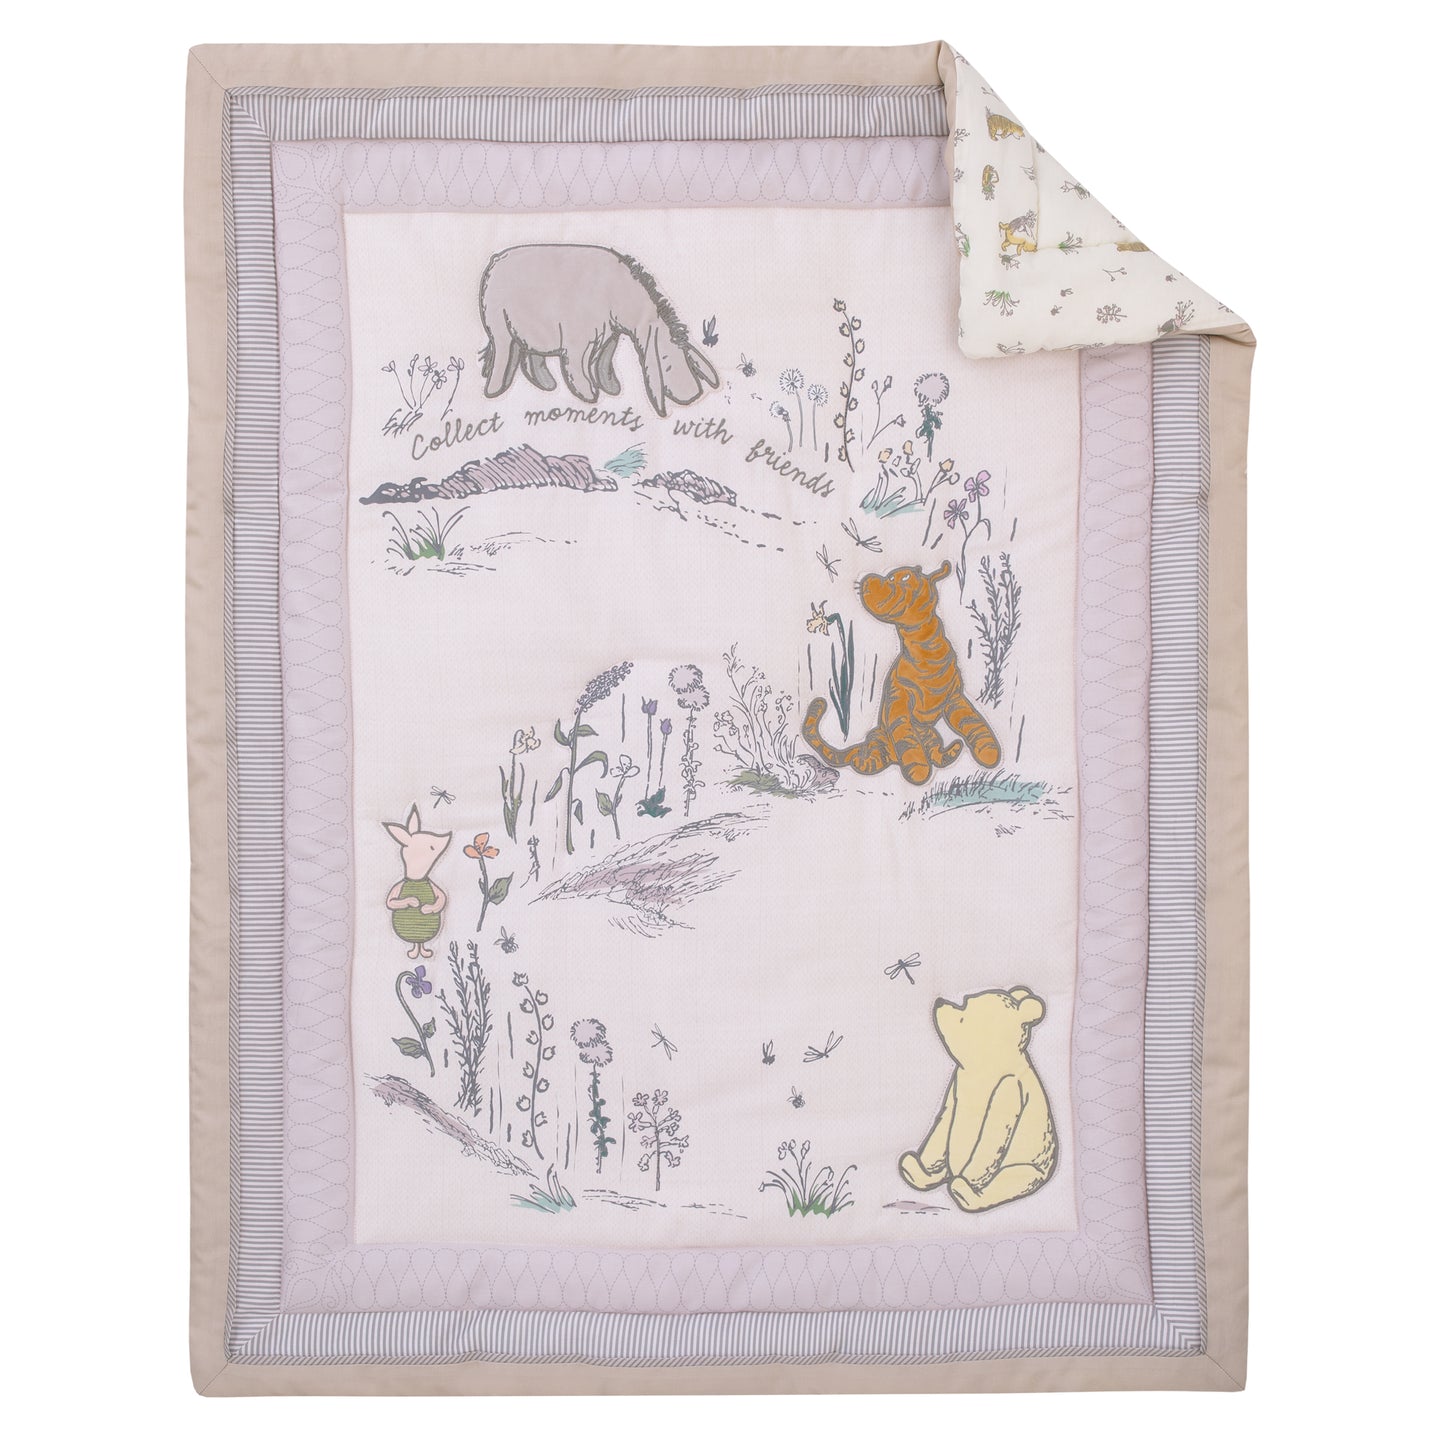 Disney Classic Pooh Naturally Friends Ivory and Taupe Piglet, Eeyore, and Tigger 3 Piece Nursery Crib Bedding Set - Comforter, 100% Cotton Fitted Crib Sheet, and Crib Skirt